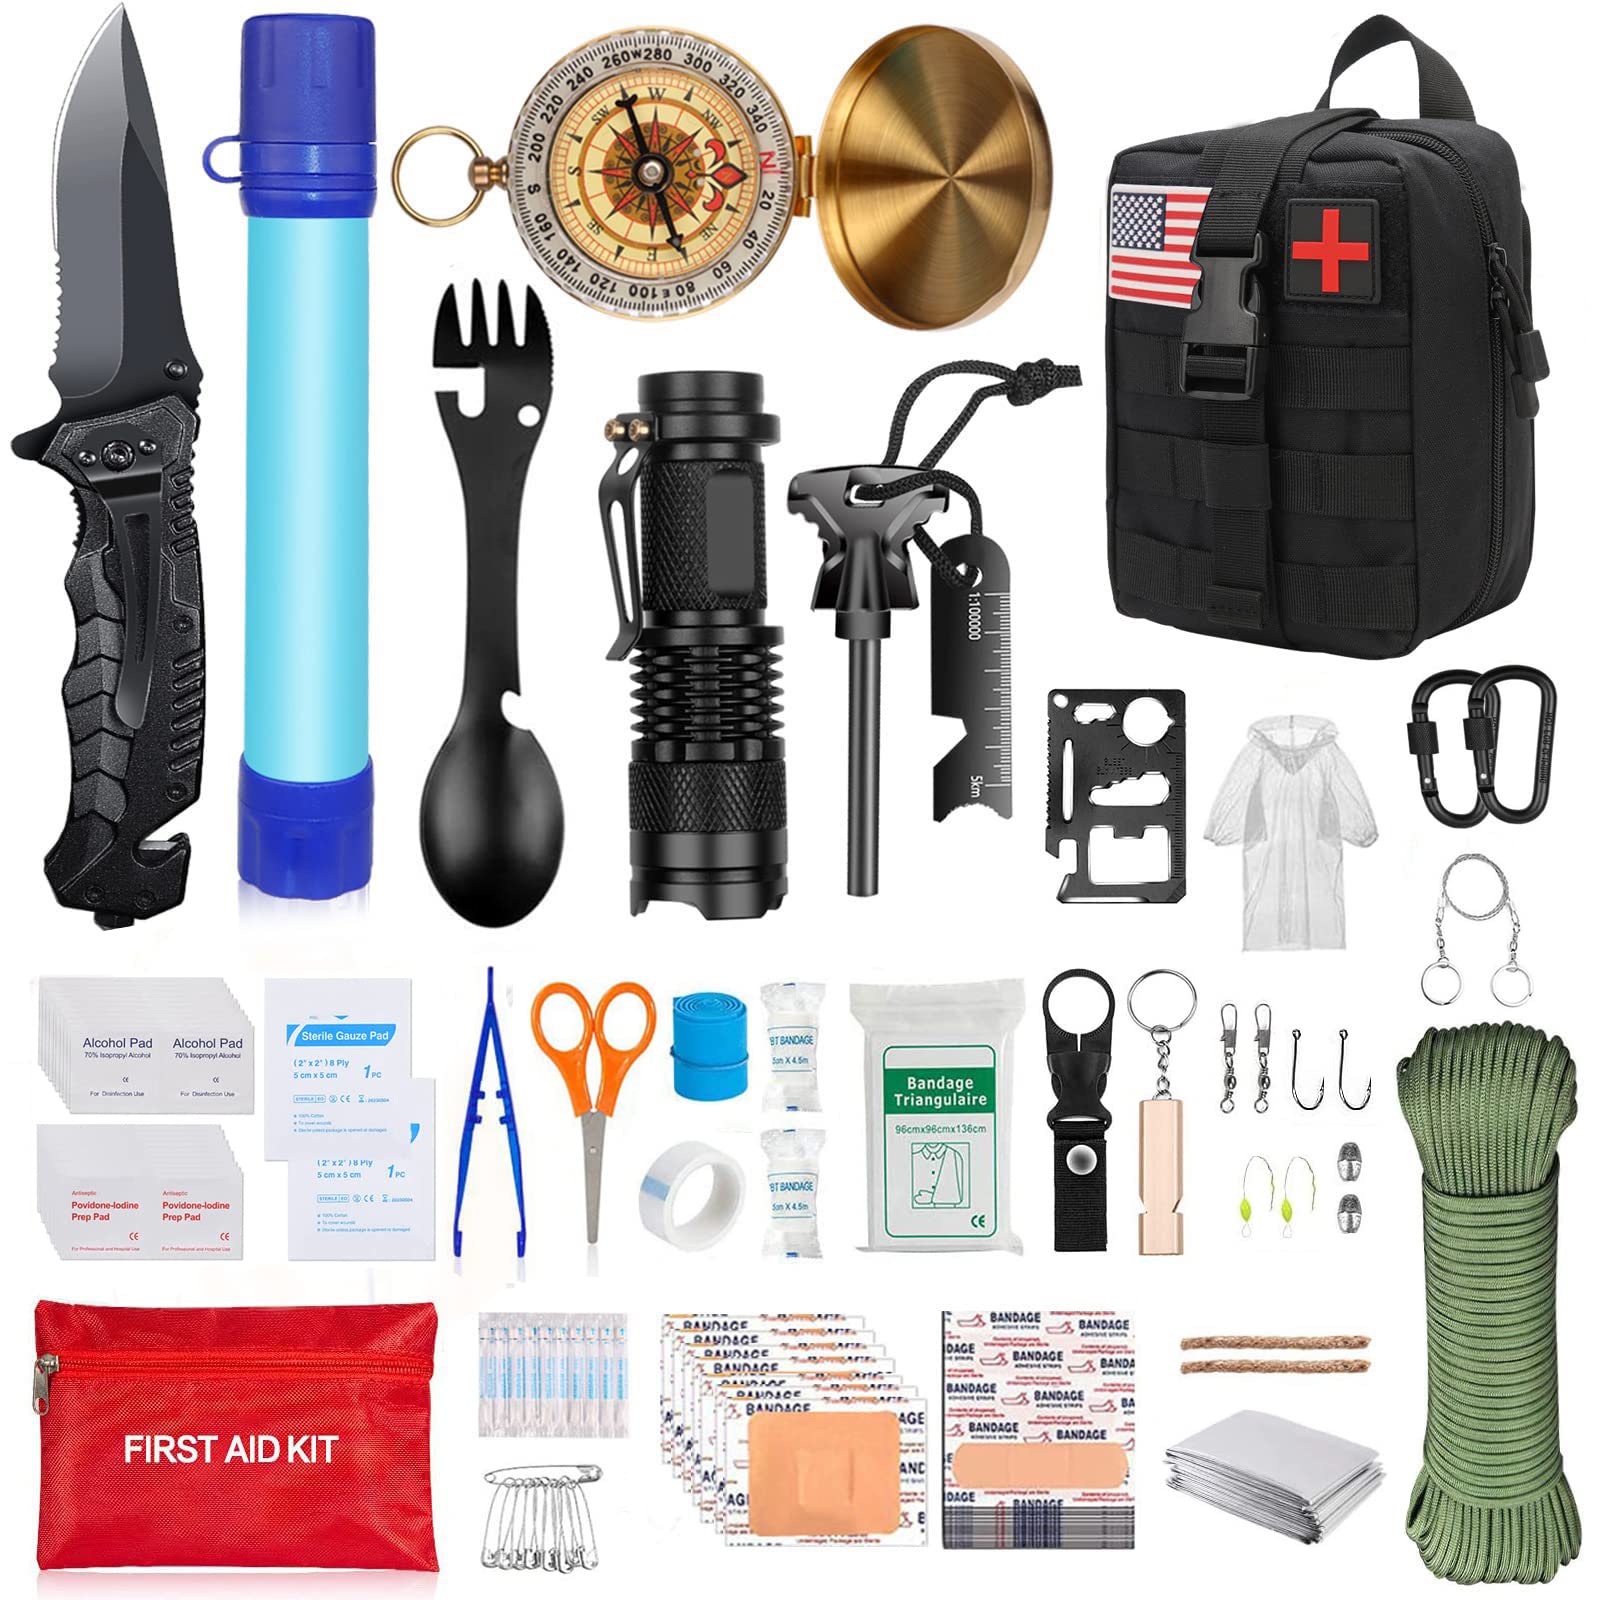  Emergency Survival Kit 176pcs Gifts for Men Dad Husband Survival  Gear Tool Kit Survival Tool Emergency Blanket Tactical Pen Pliers for  Wilderness Camping Hiking First Aid for Earthquake : Sports 